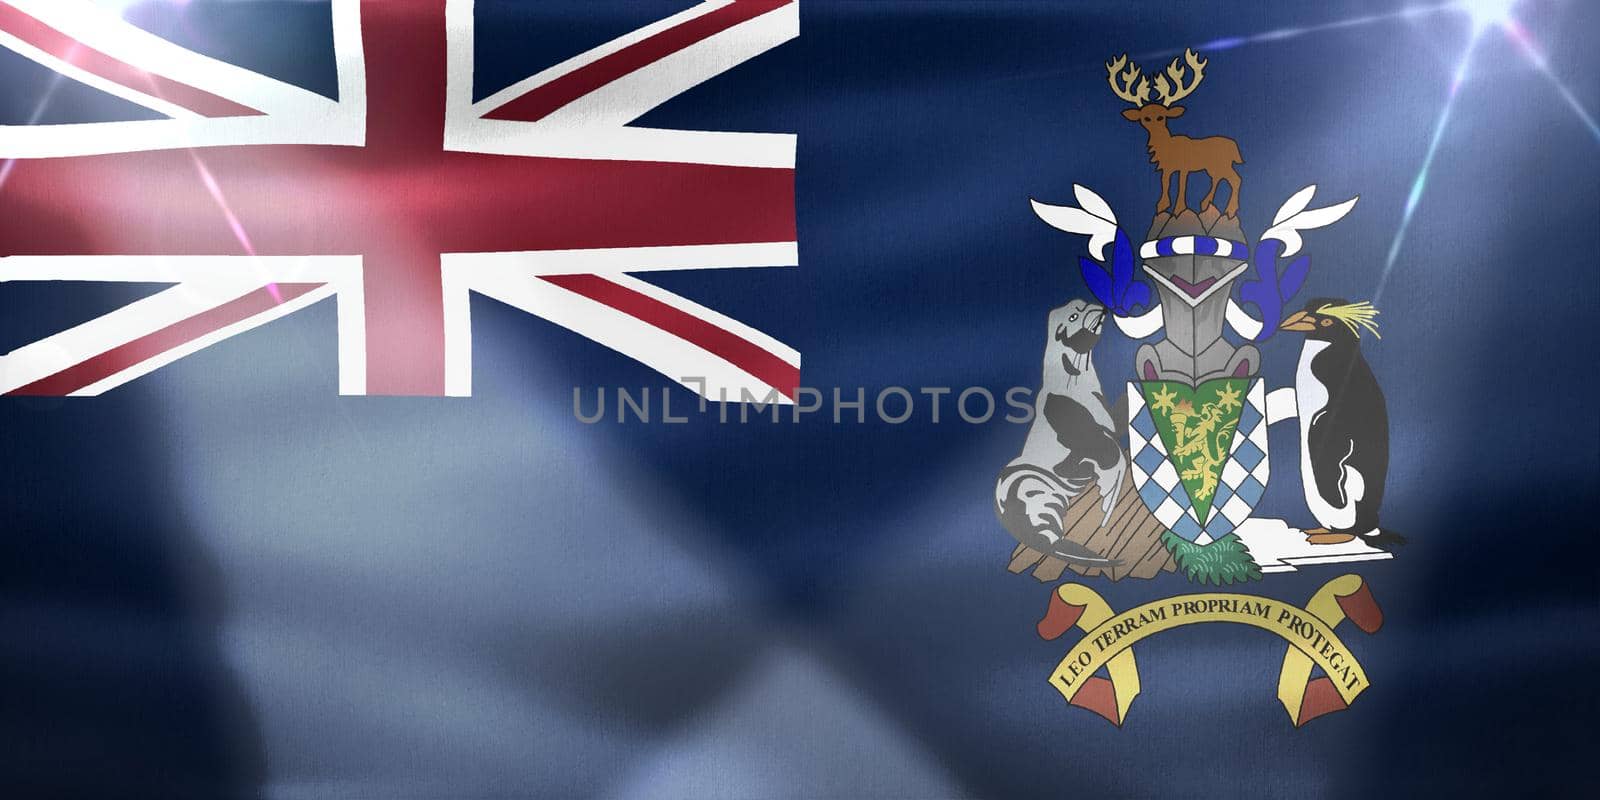 South Georgia and the South Sandwich Islands flag - realistic waving fabric flag by MP_foto71